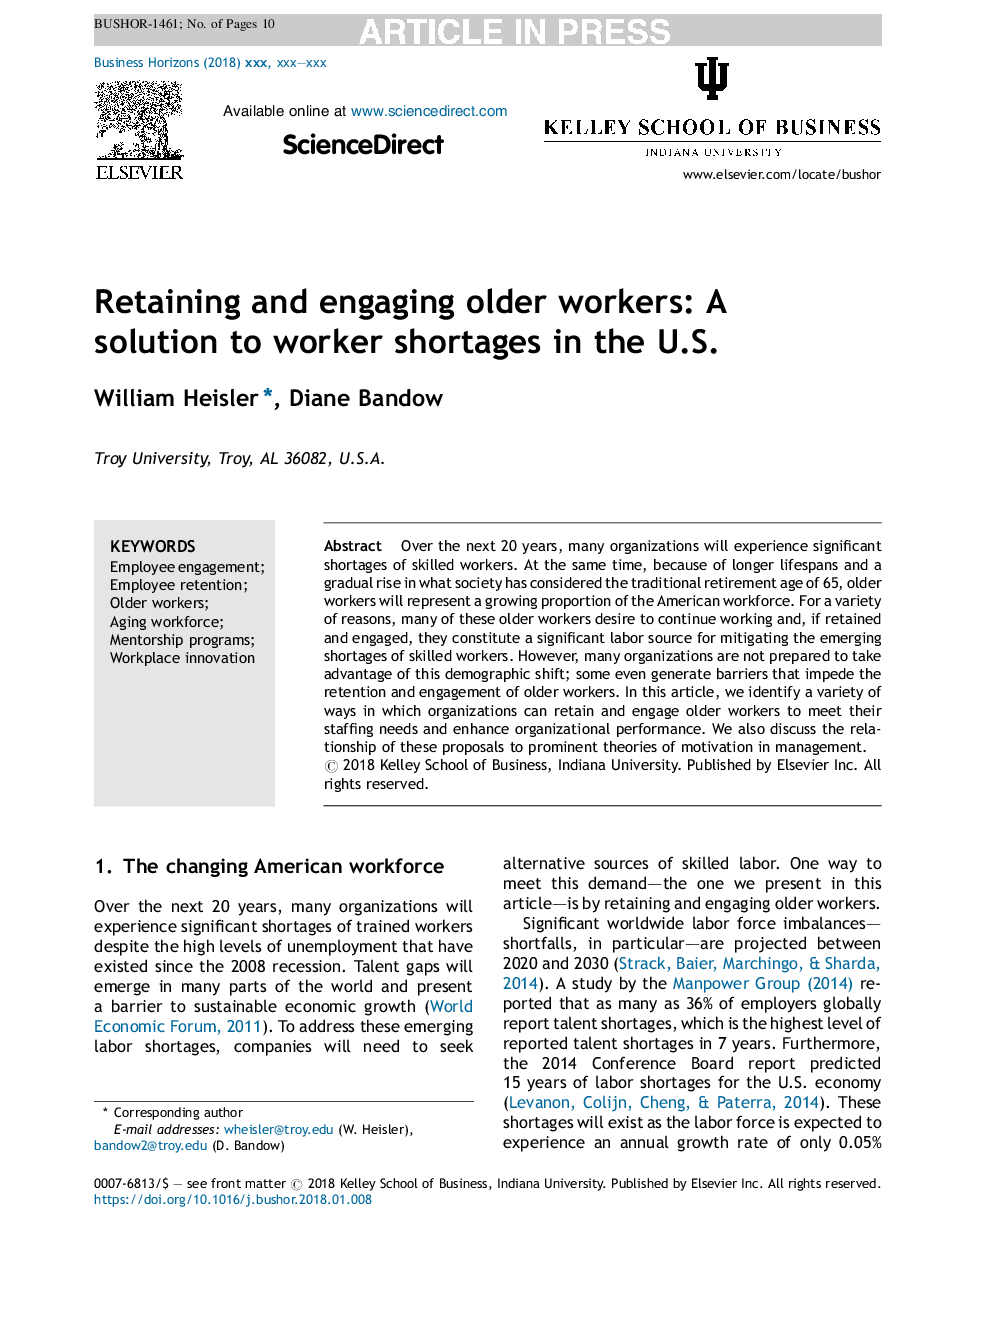 Retaining and engaging older workers: A solution to worker shortages in the U.S.